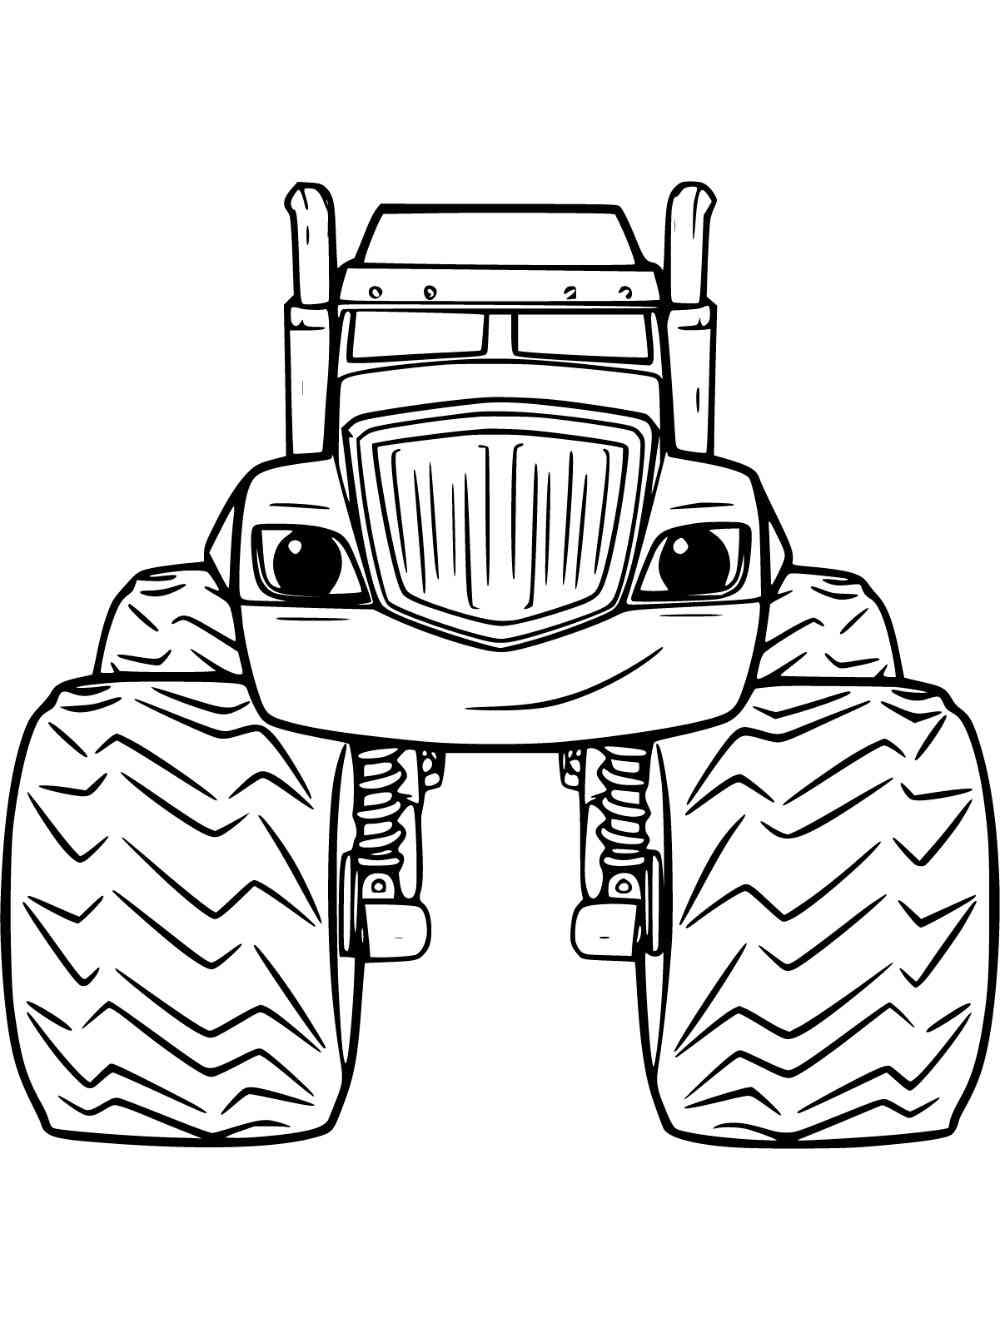 Big Crusher from Blaze and the Monster Machines coloring page